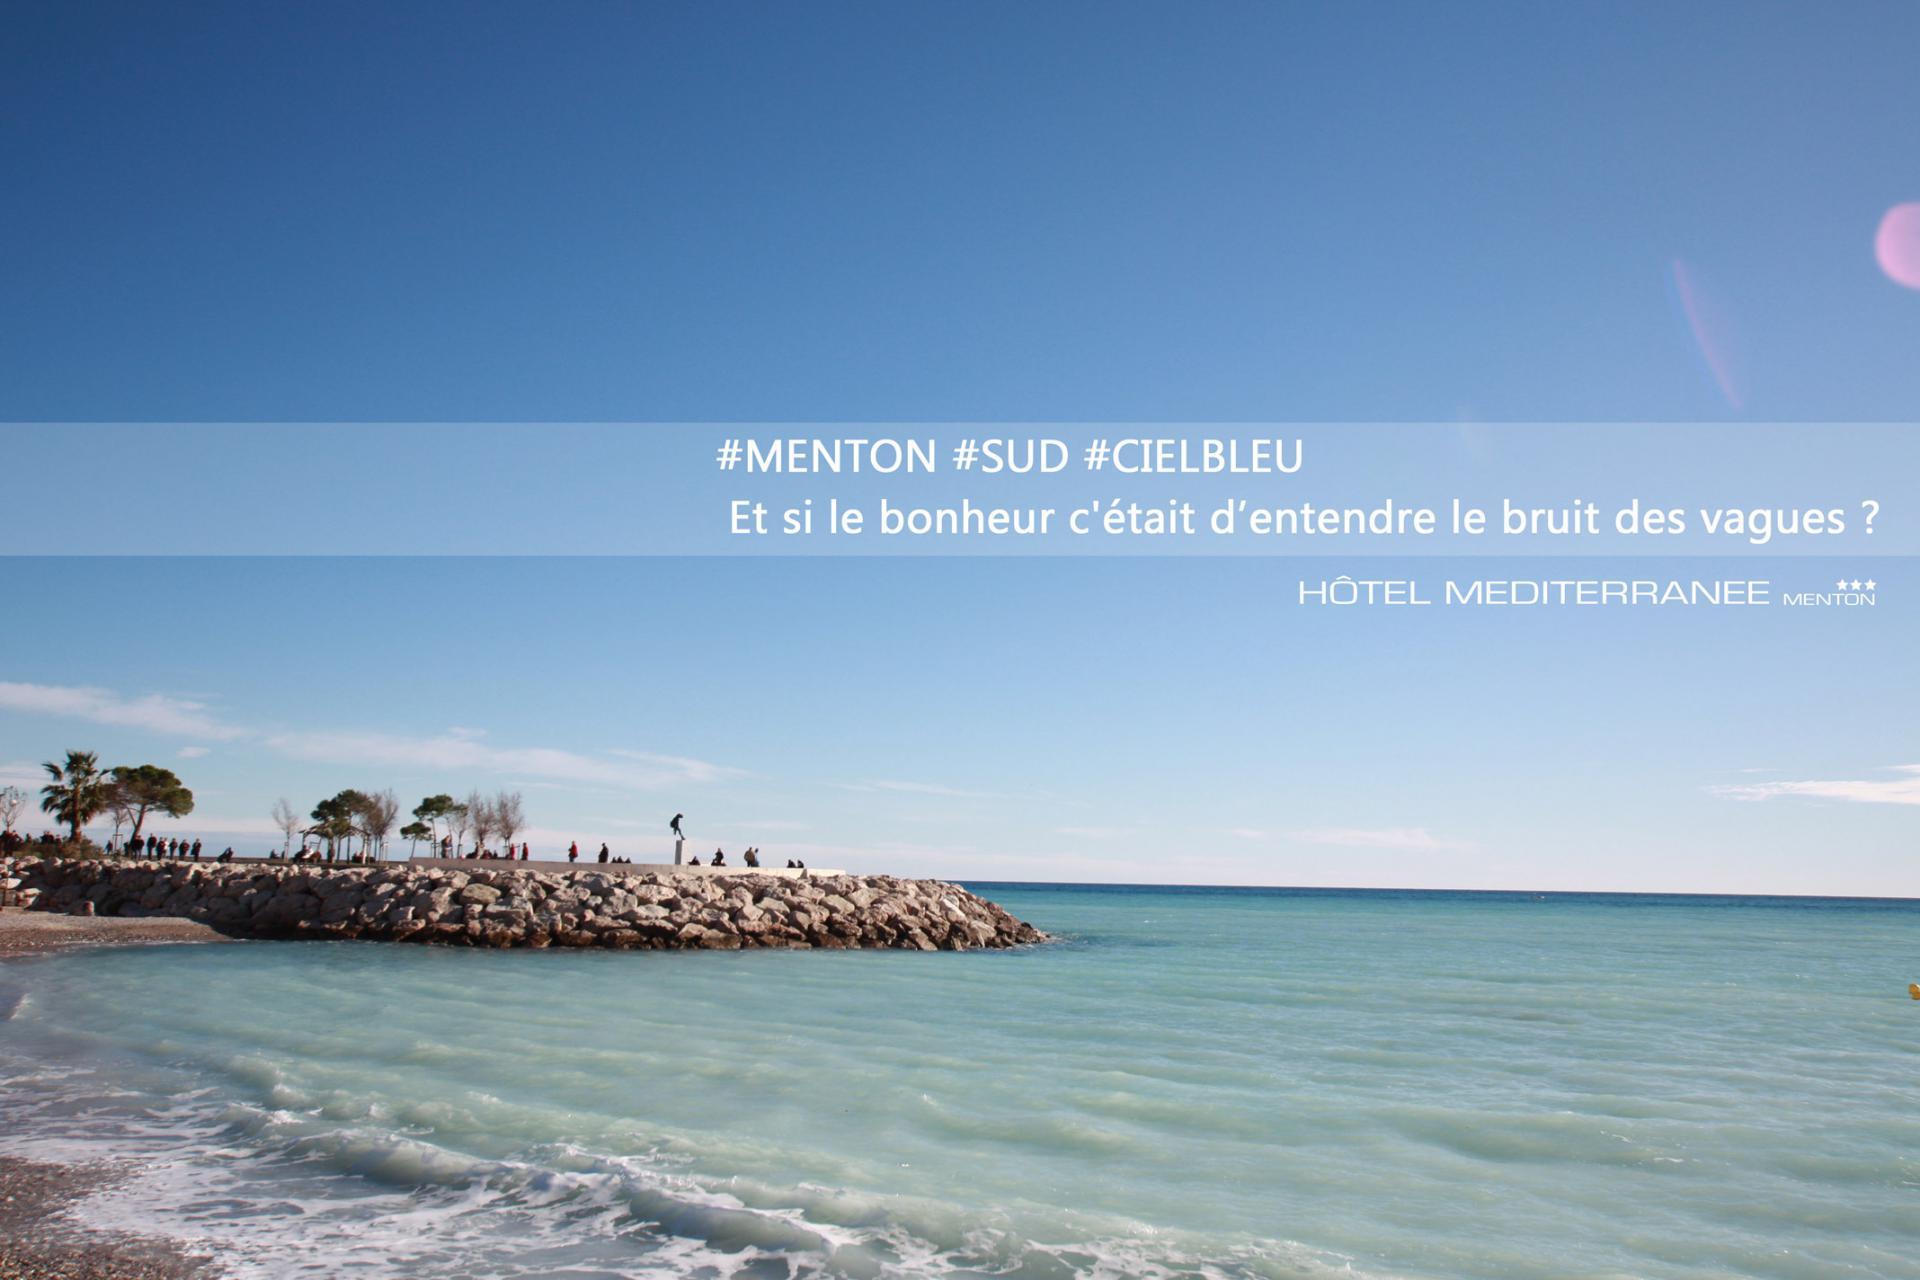 RELAXING HOLIDAYS IN MENTON